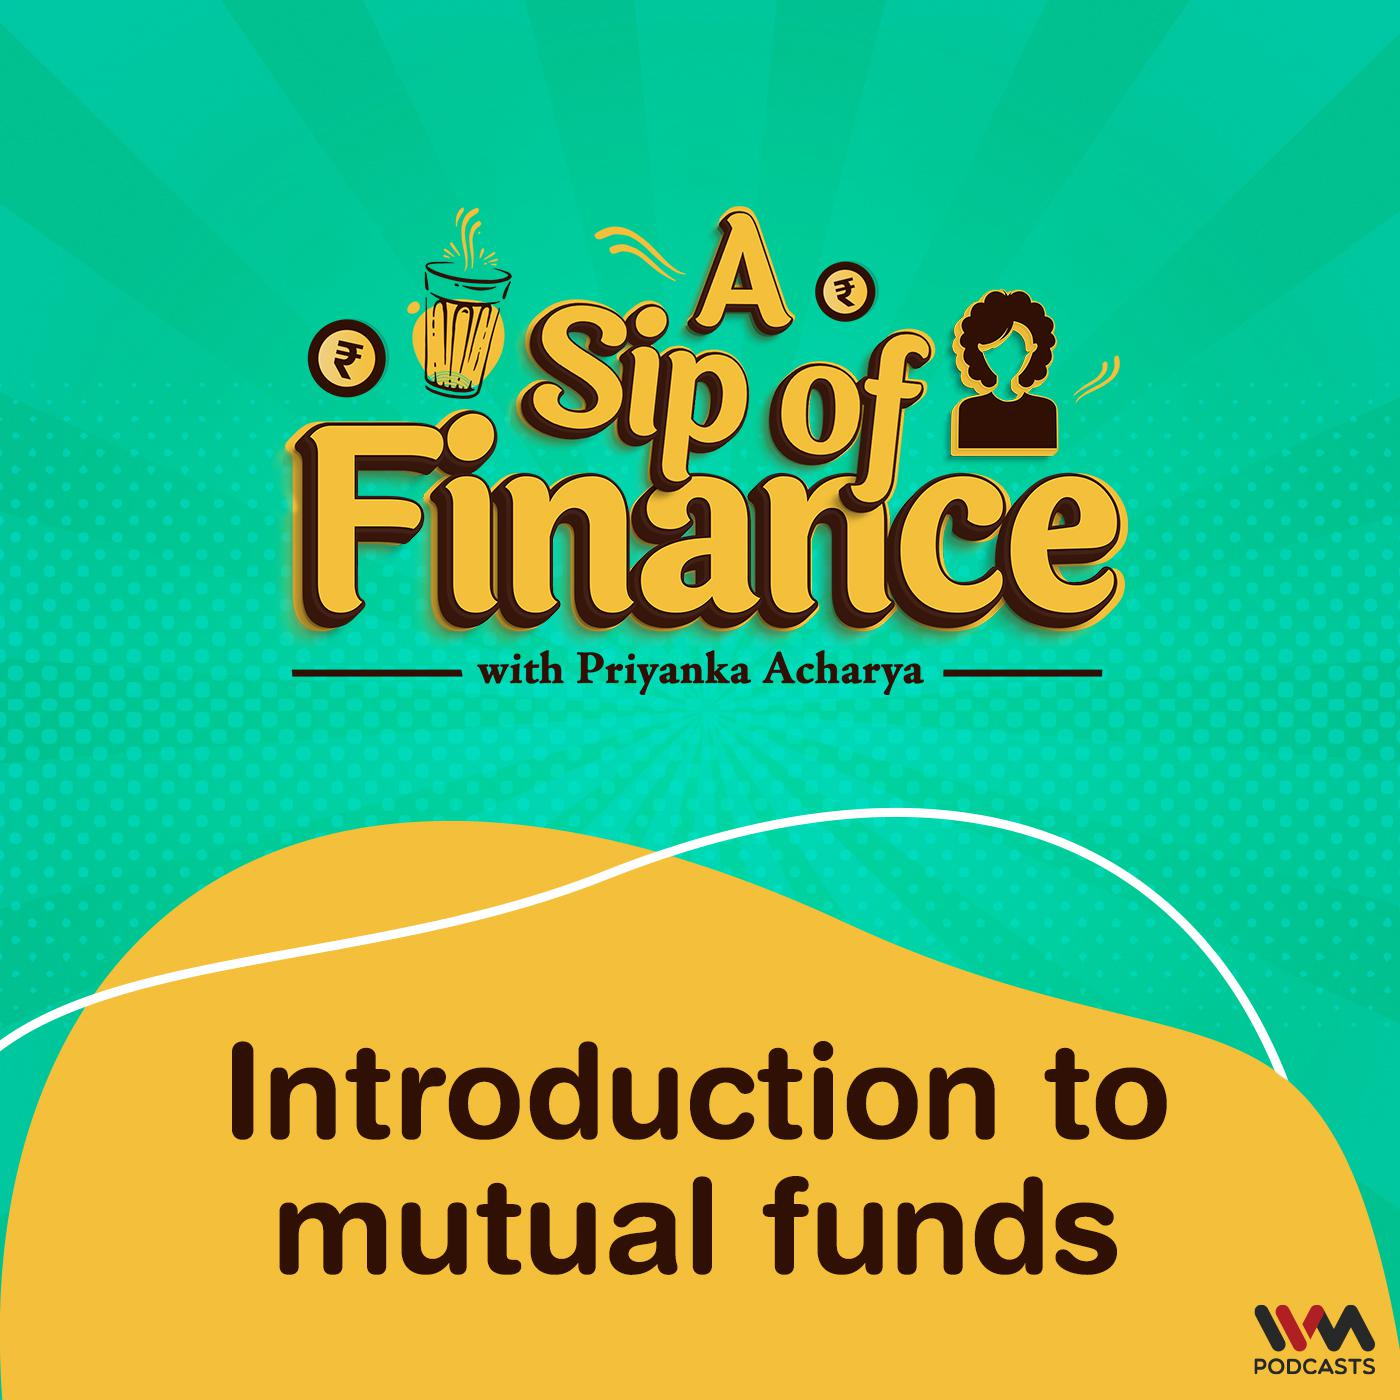 Introduction to mutual funds